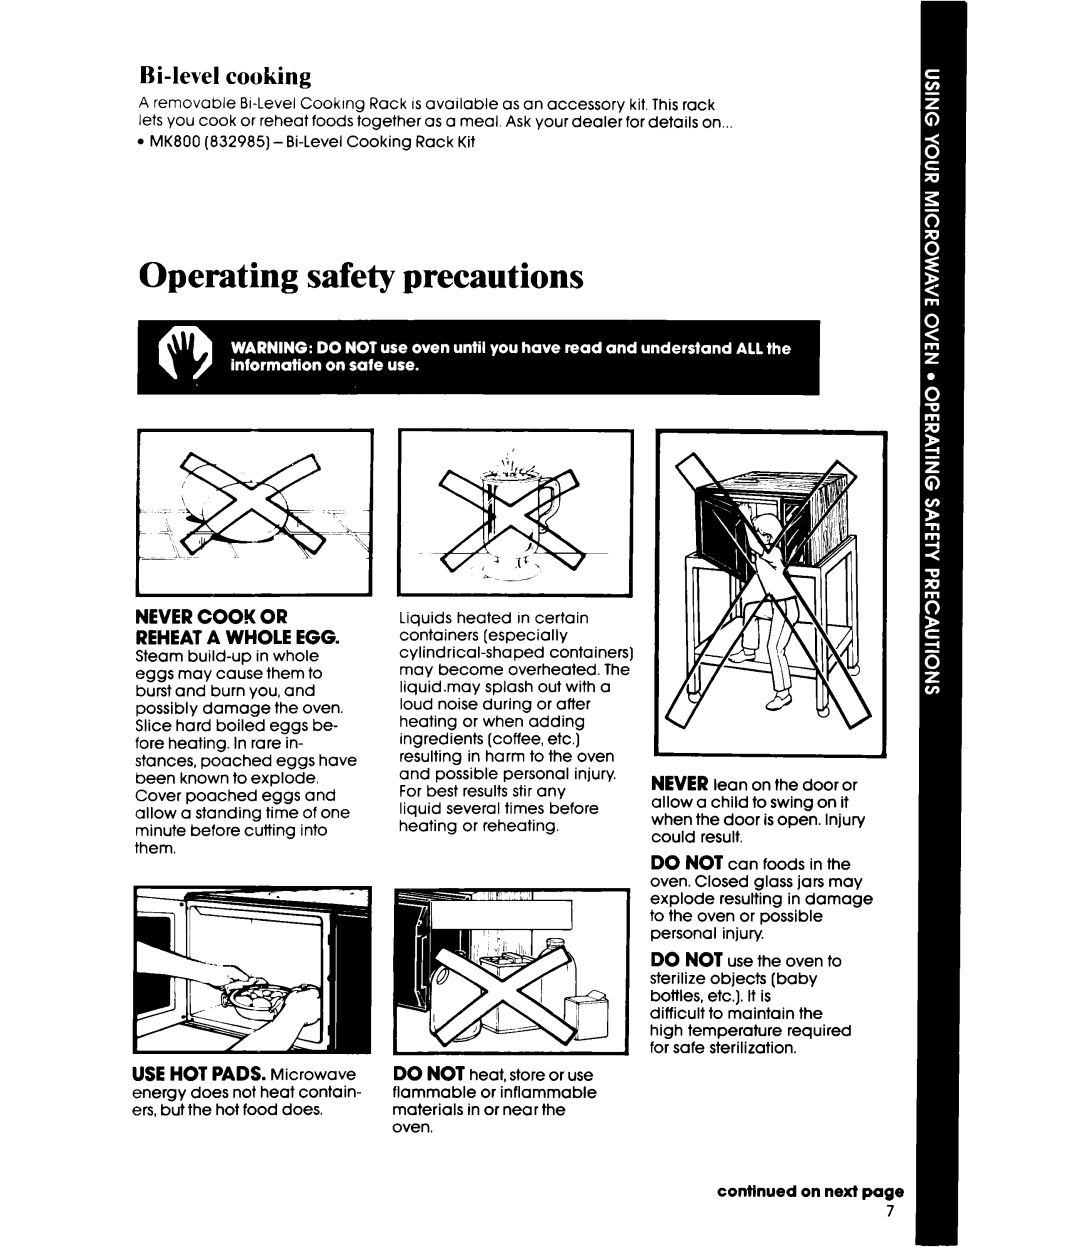 Whirlpool MW8100XR manual Operating safety precautions, Bi-levelcooking 